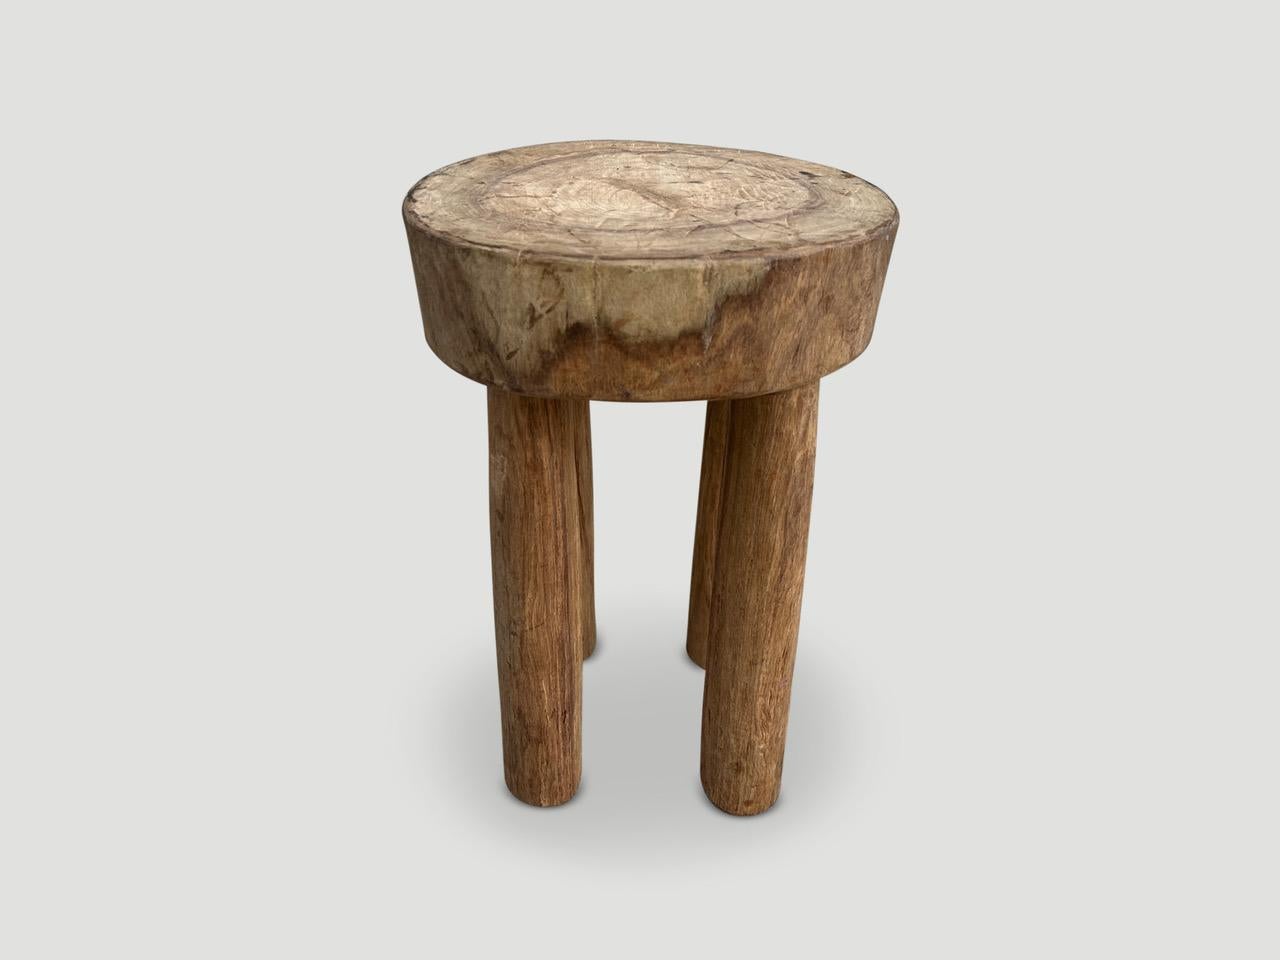 Beautiful antique side table or stool hand carved by the Senufo tribes from a single block of mahogany wood native to the west coast of Africa. The wood is tough, dense and very durable. The light tone wood on this one is unusual as they are mostly